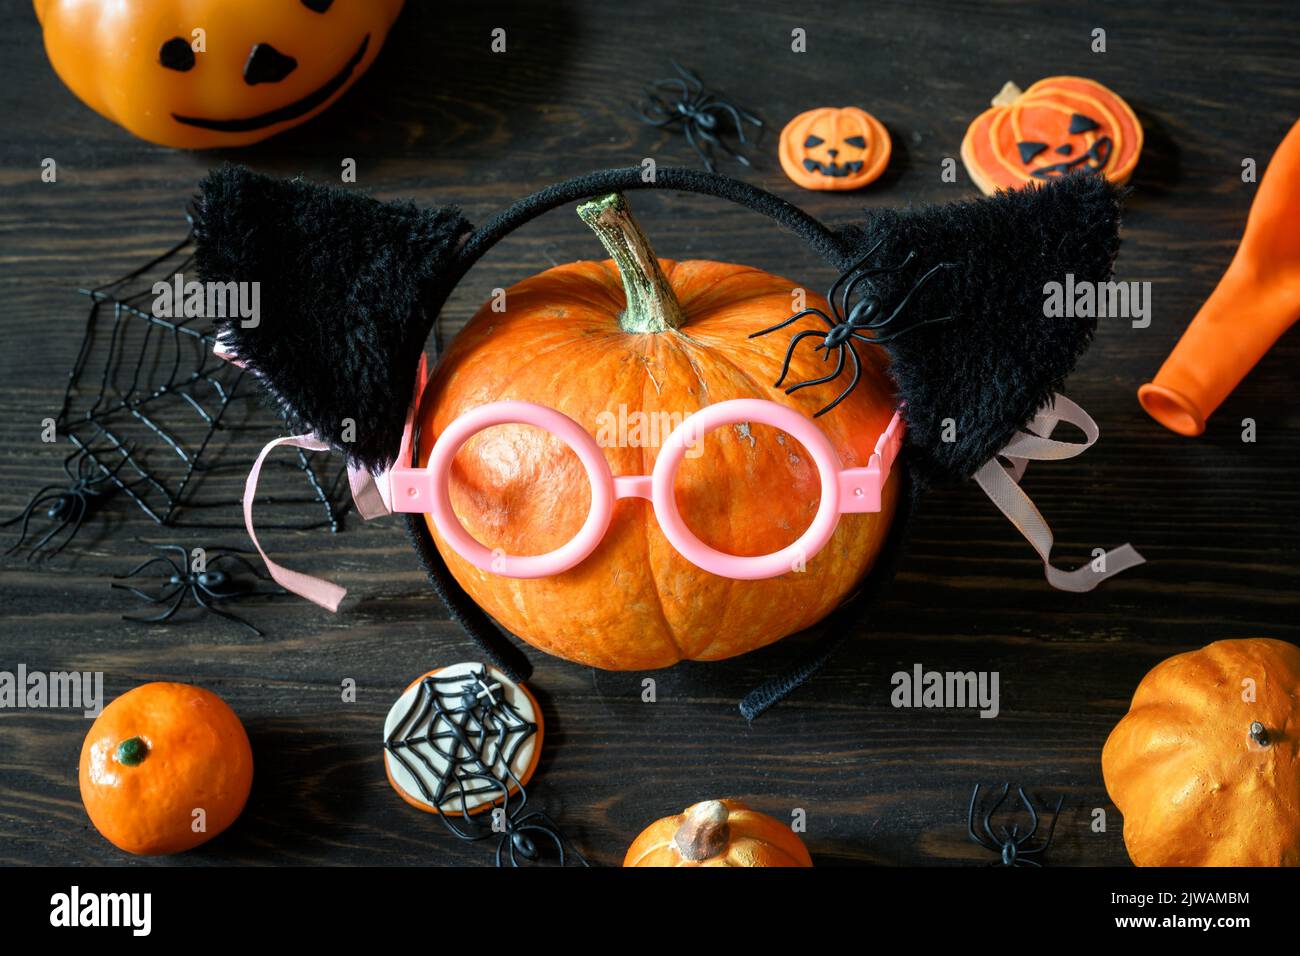 Halloween still life on wooden table, pumpkins and sweets on dark wood. Happy orange pumpkin with glasses, variety Halloween food and decorations. Lif Stock Photo